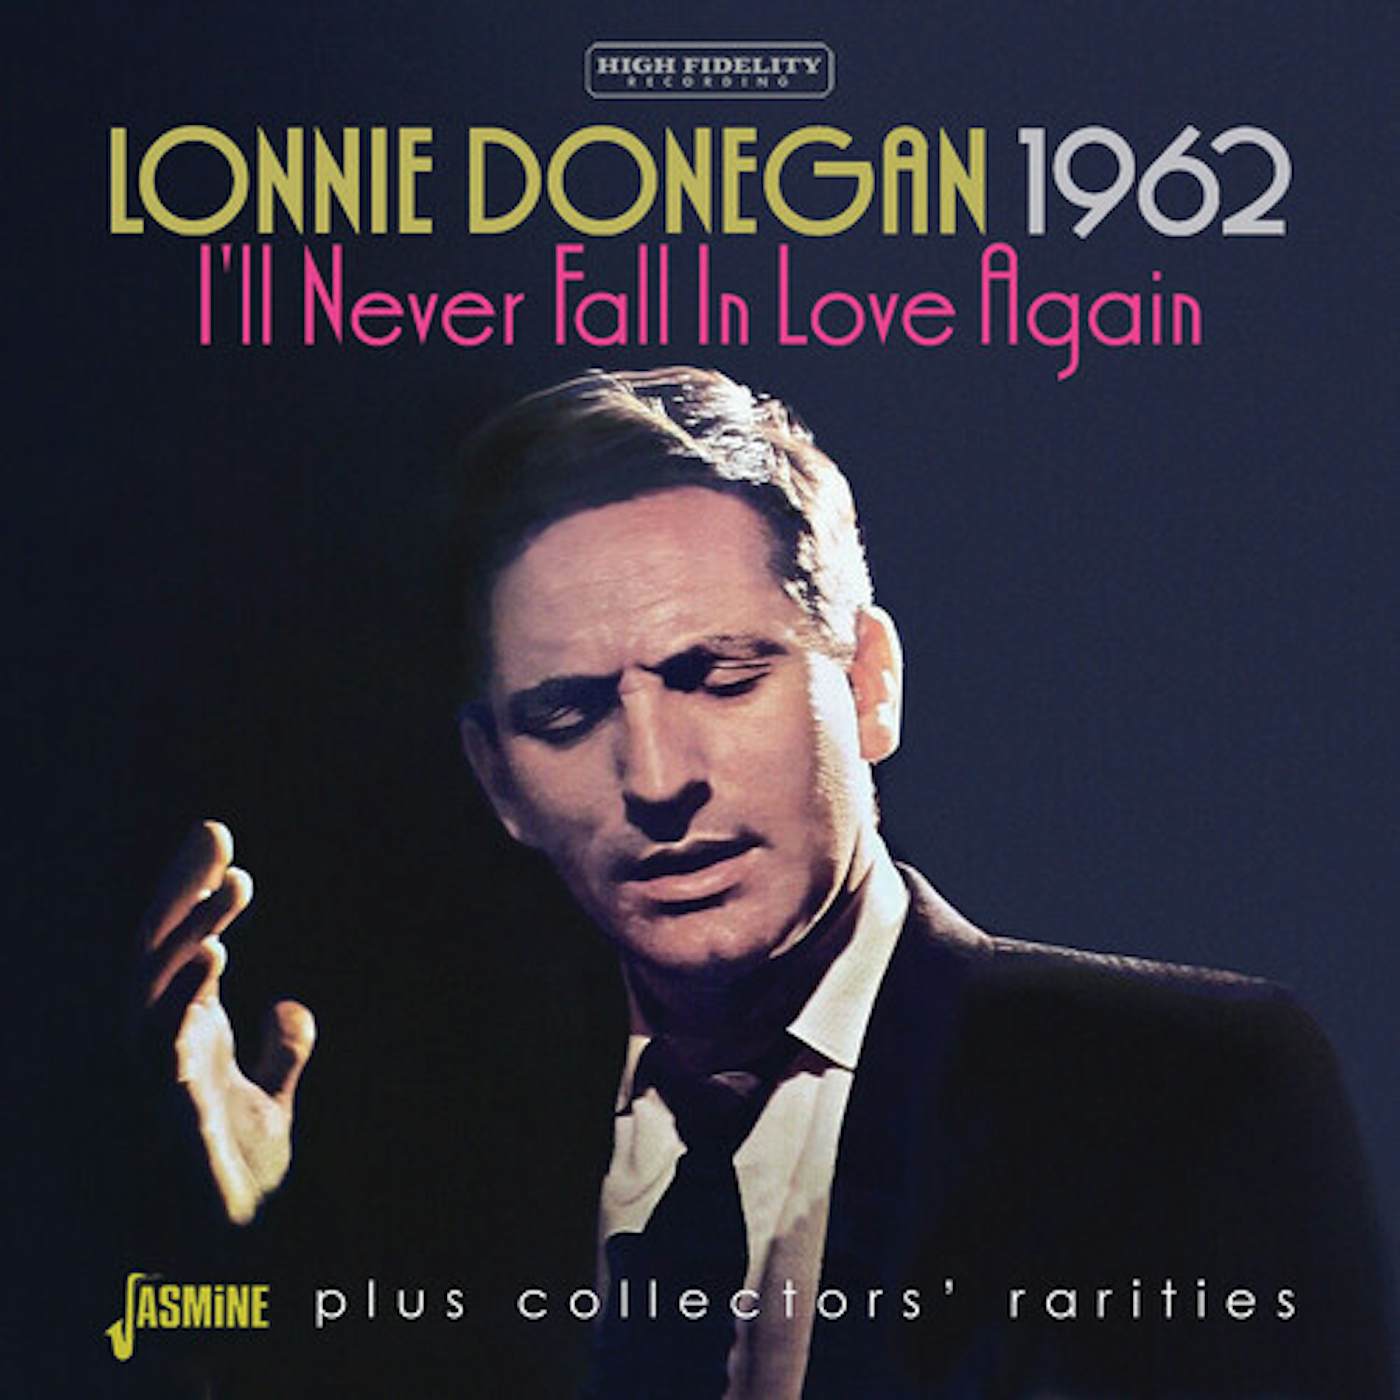 Lonnie Donegan 1962: I'LL NEVER FALL IN LOVE AGAIN + COLLECTORS CD